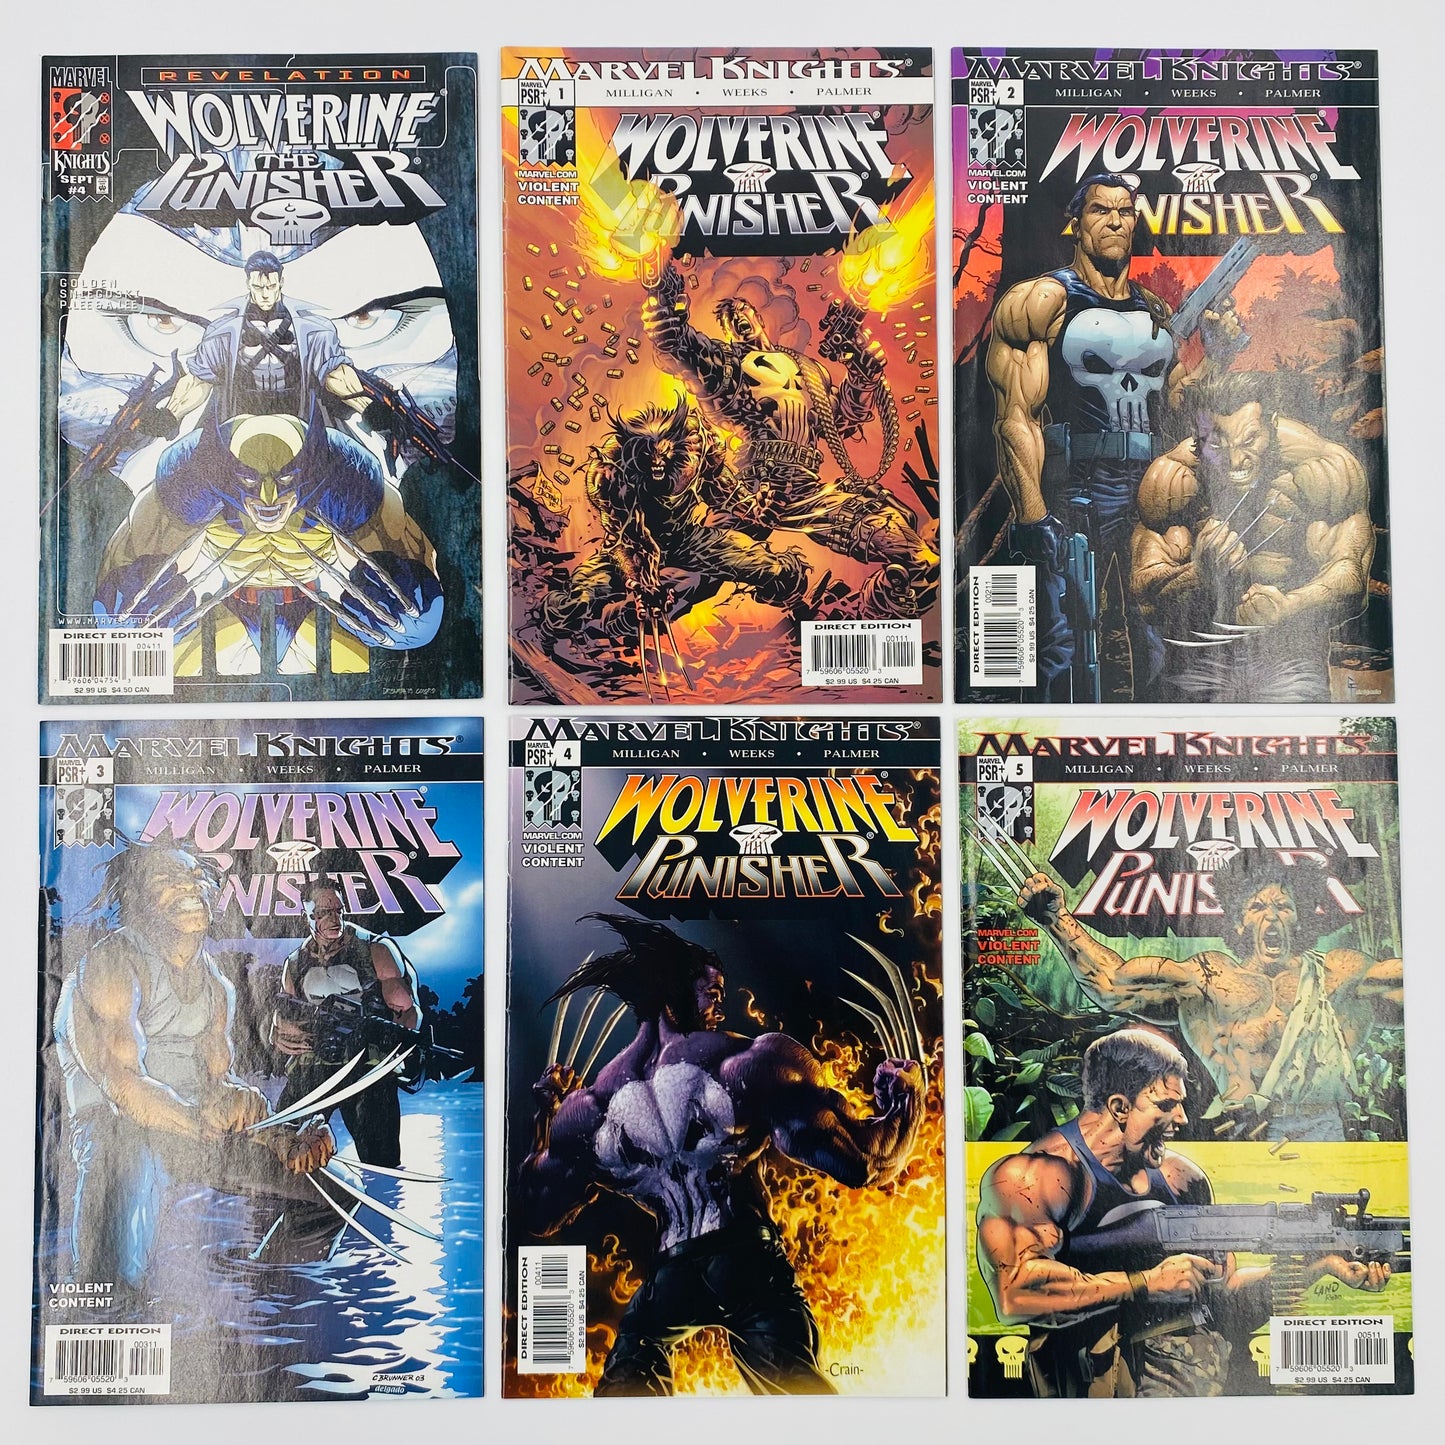 Wolverine & Punisher Fun Pack: Wolverine and the Punisher Damaging Evidence #1-3 (1993) Wolverine The Punisher Revelation #1-4 (1999) Wolverine Punisher #1-5 (2004) Marvel/Marvel Knights